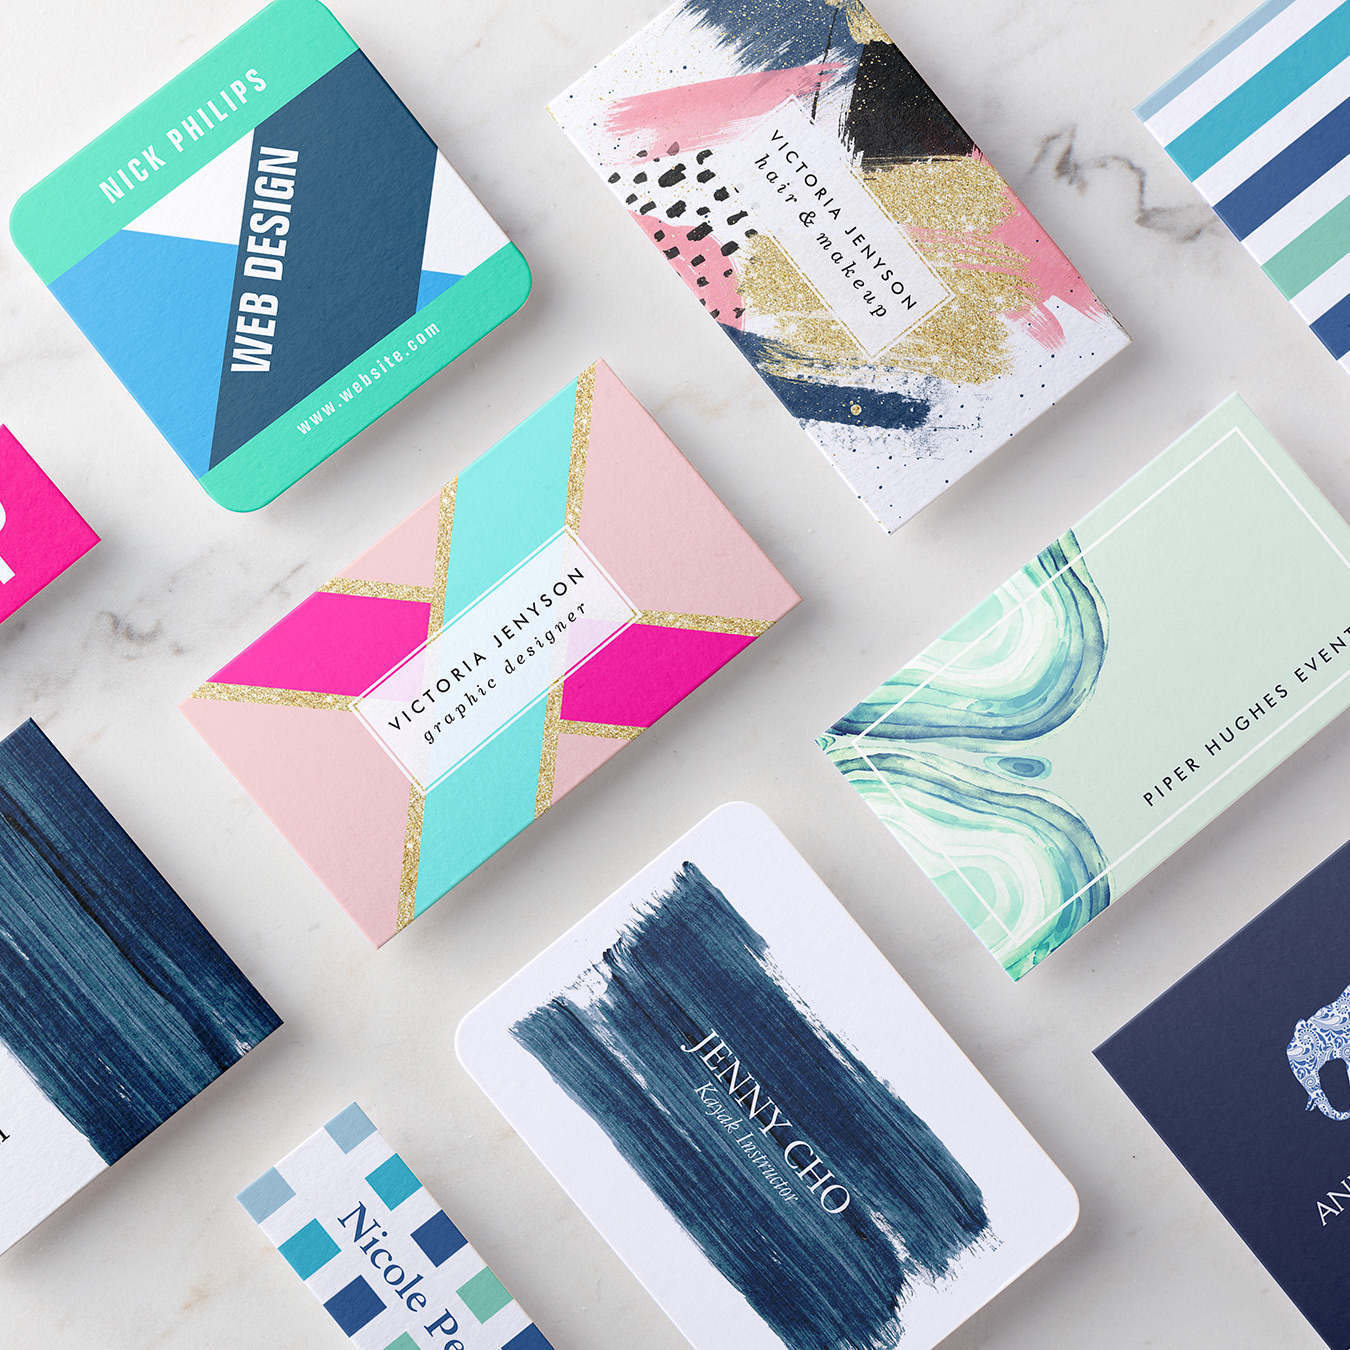 Choosing Your Business Card Colors